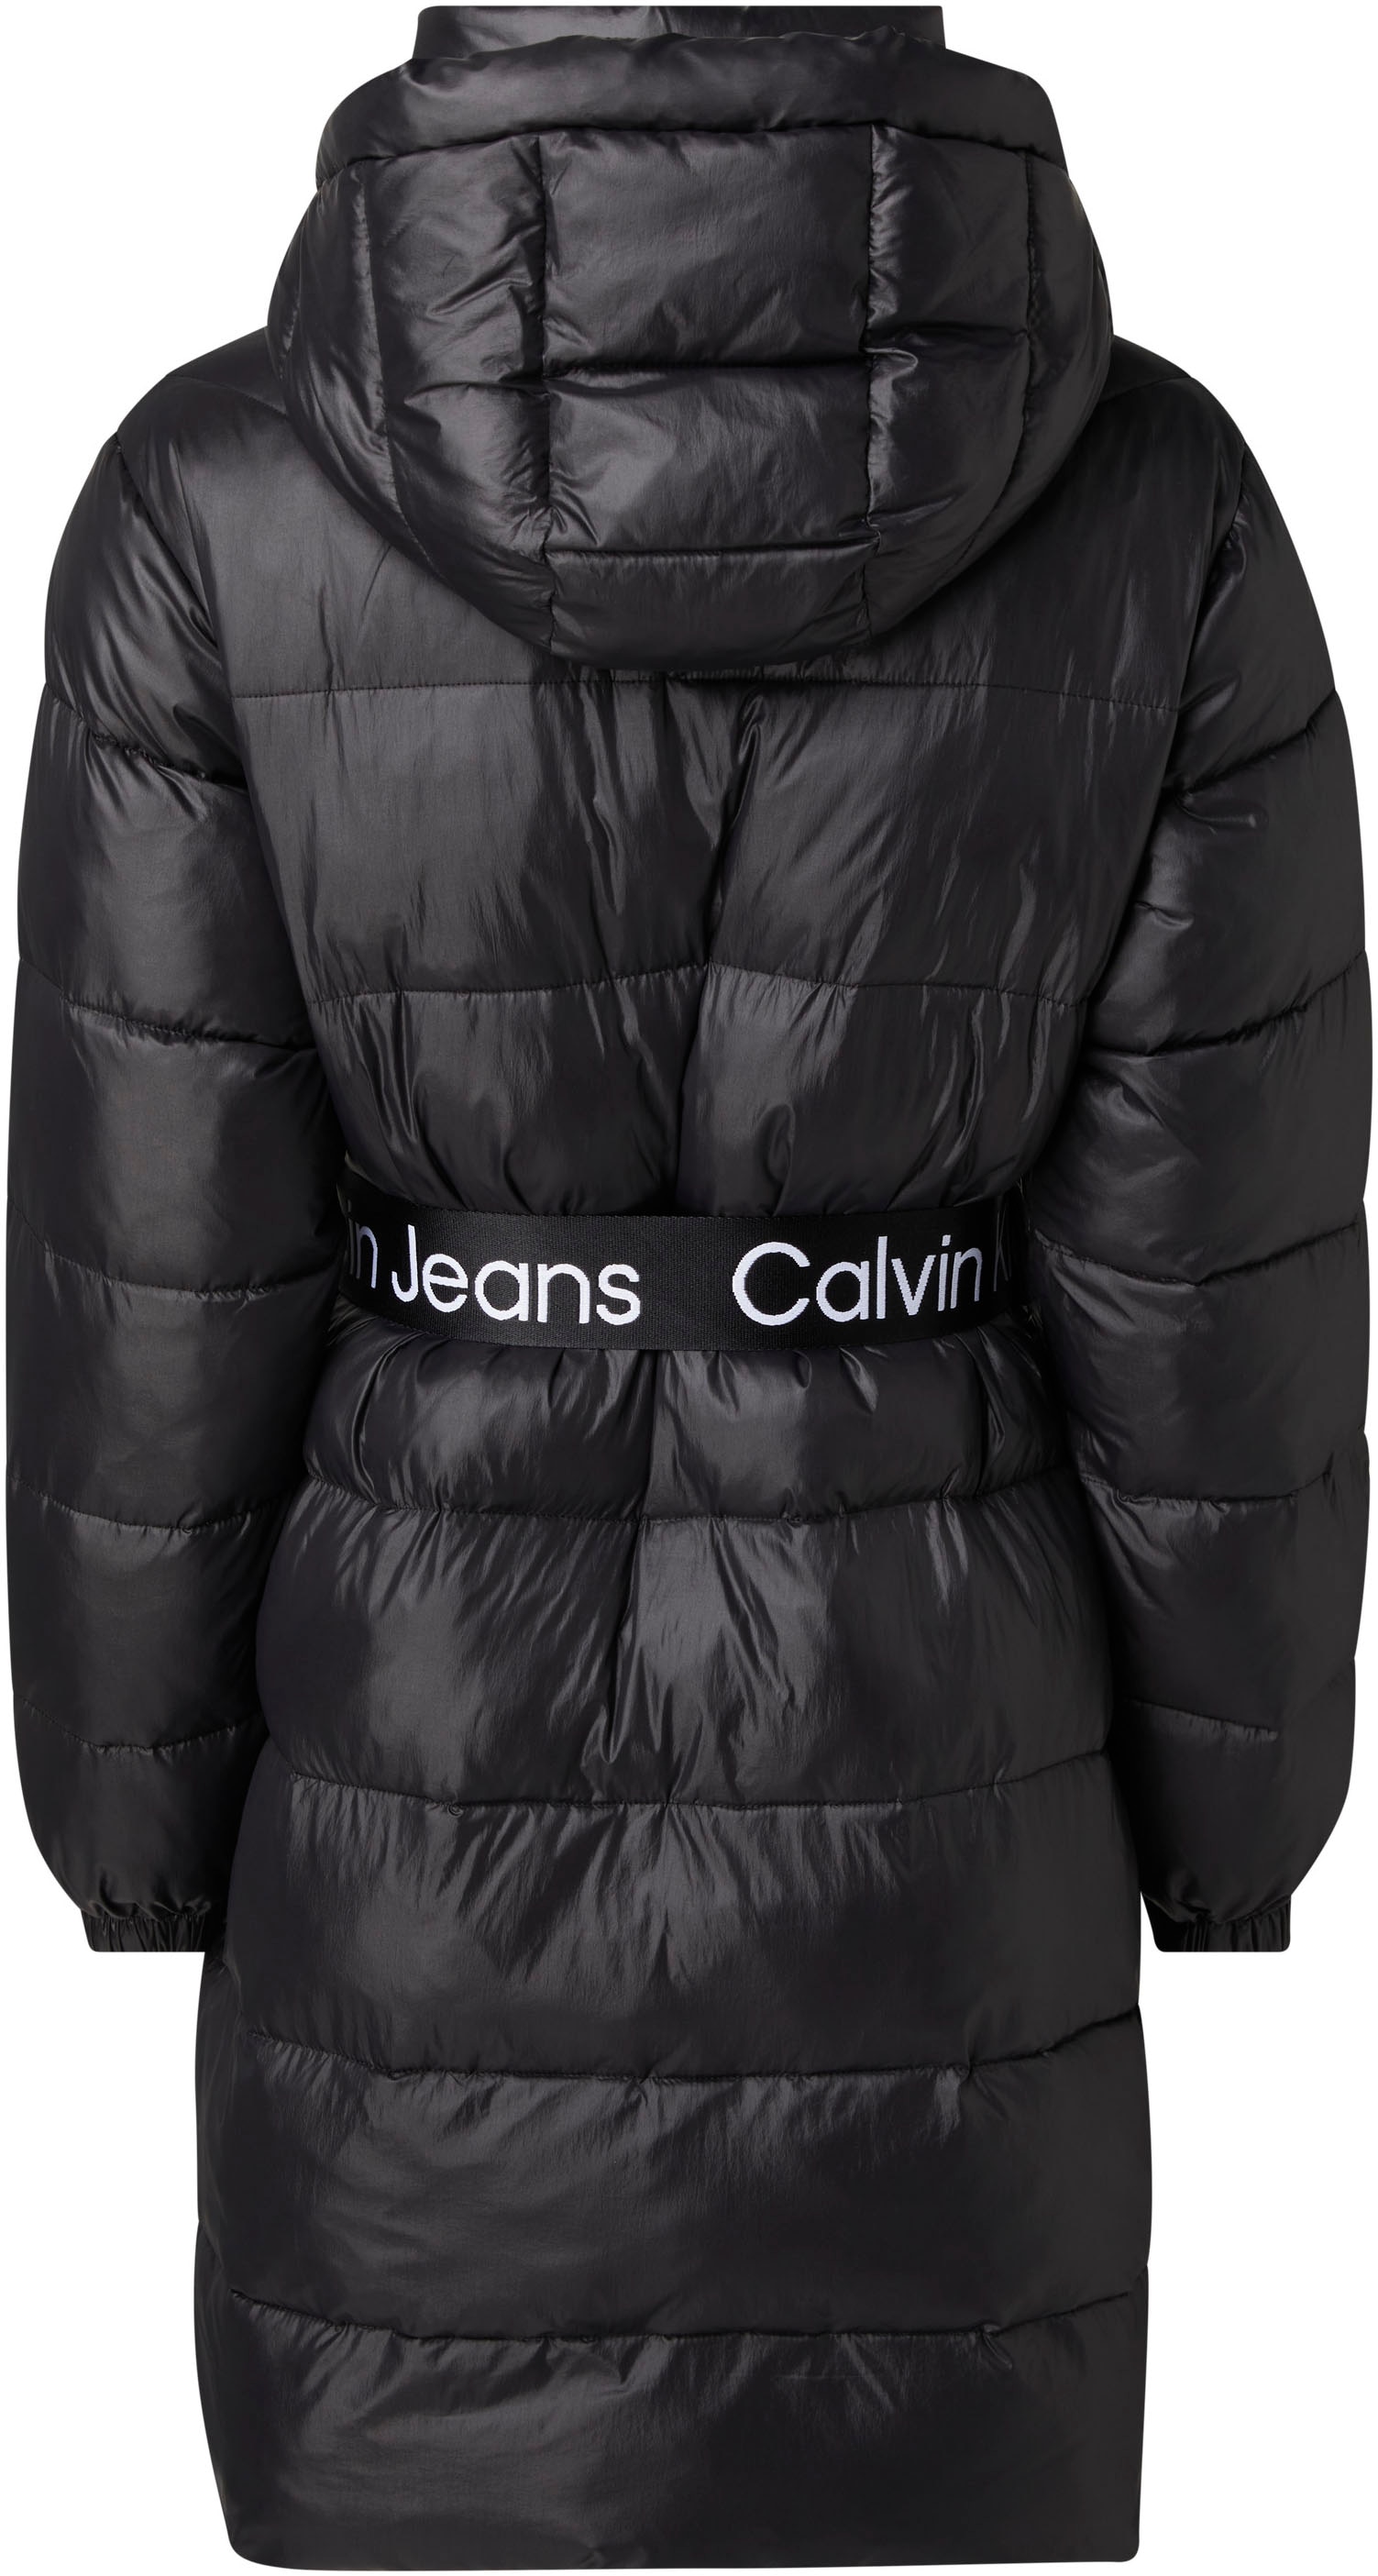 Calvin Klein FITTED Jeans Steppjacke JACKET«, »LW bei PADDED LONG ♕ mit Kapuze